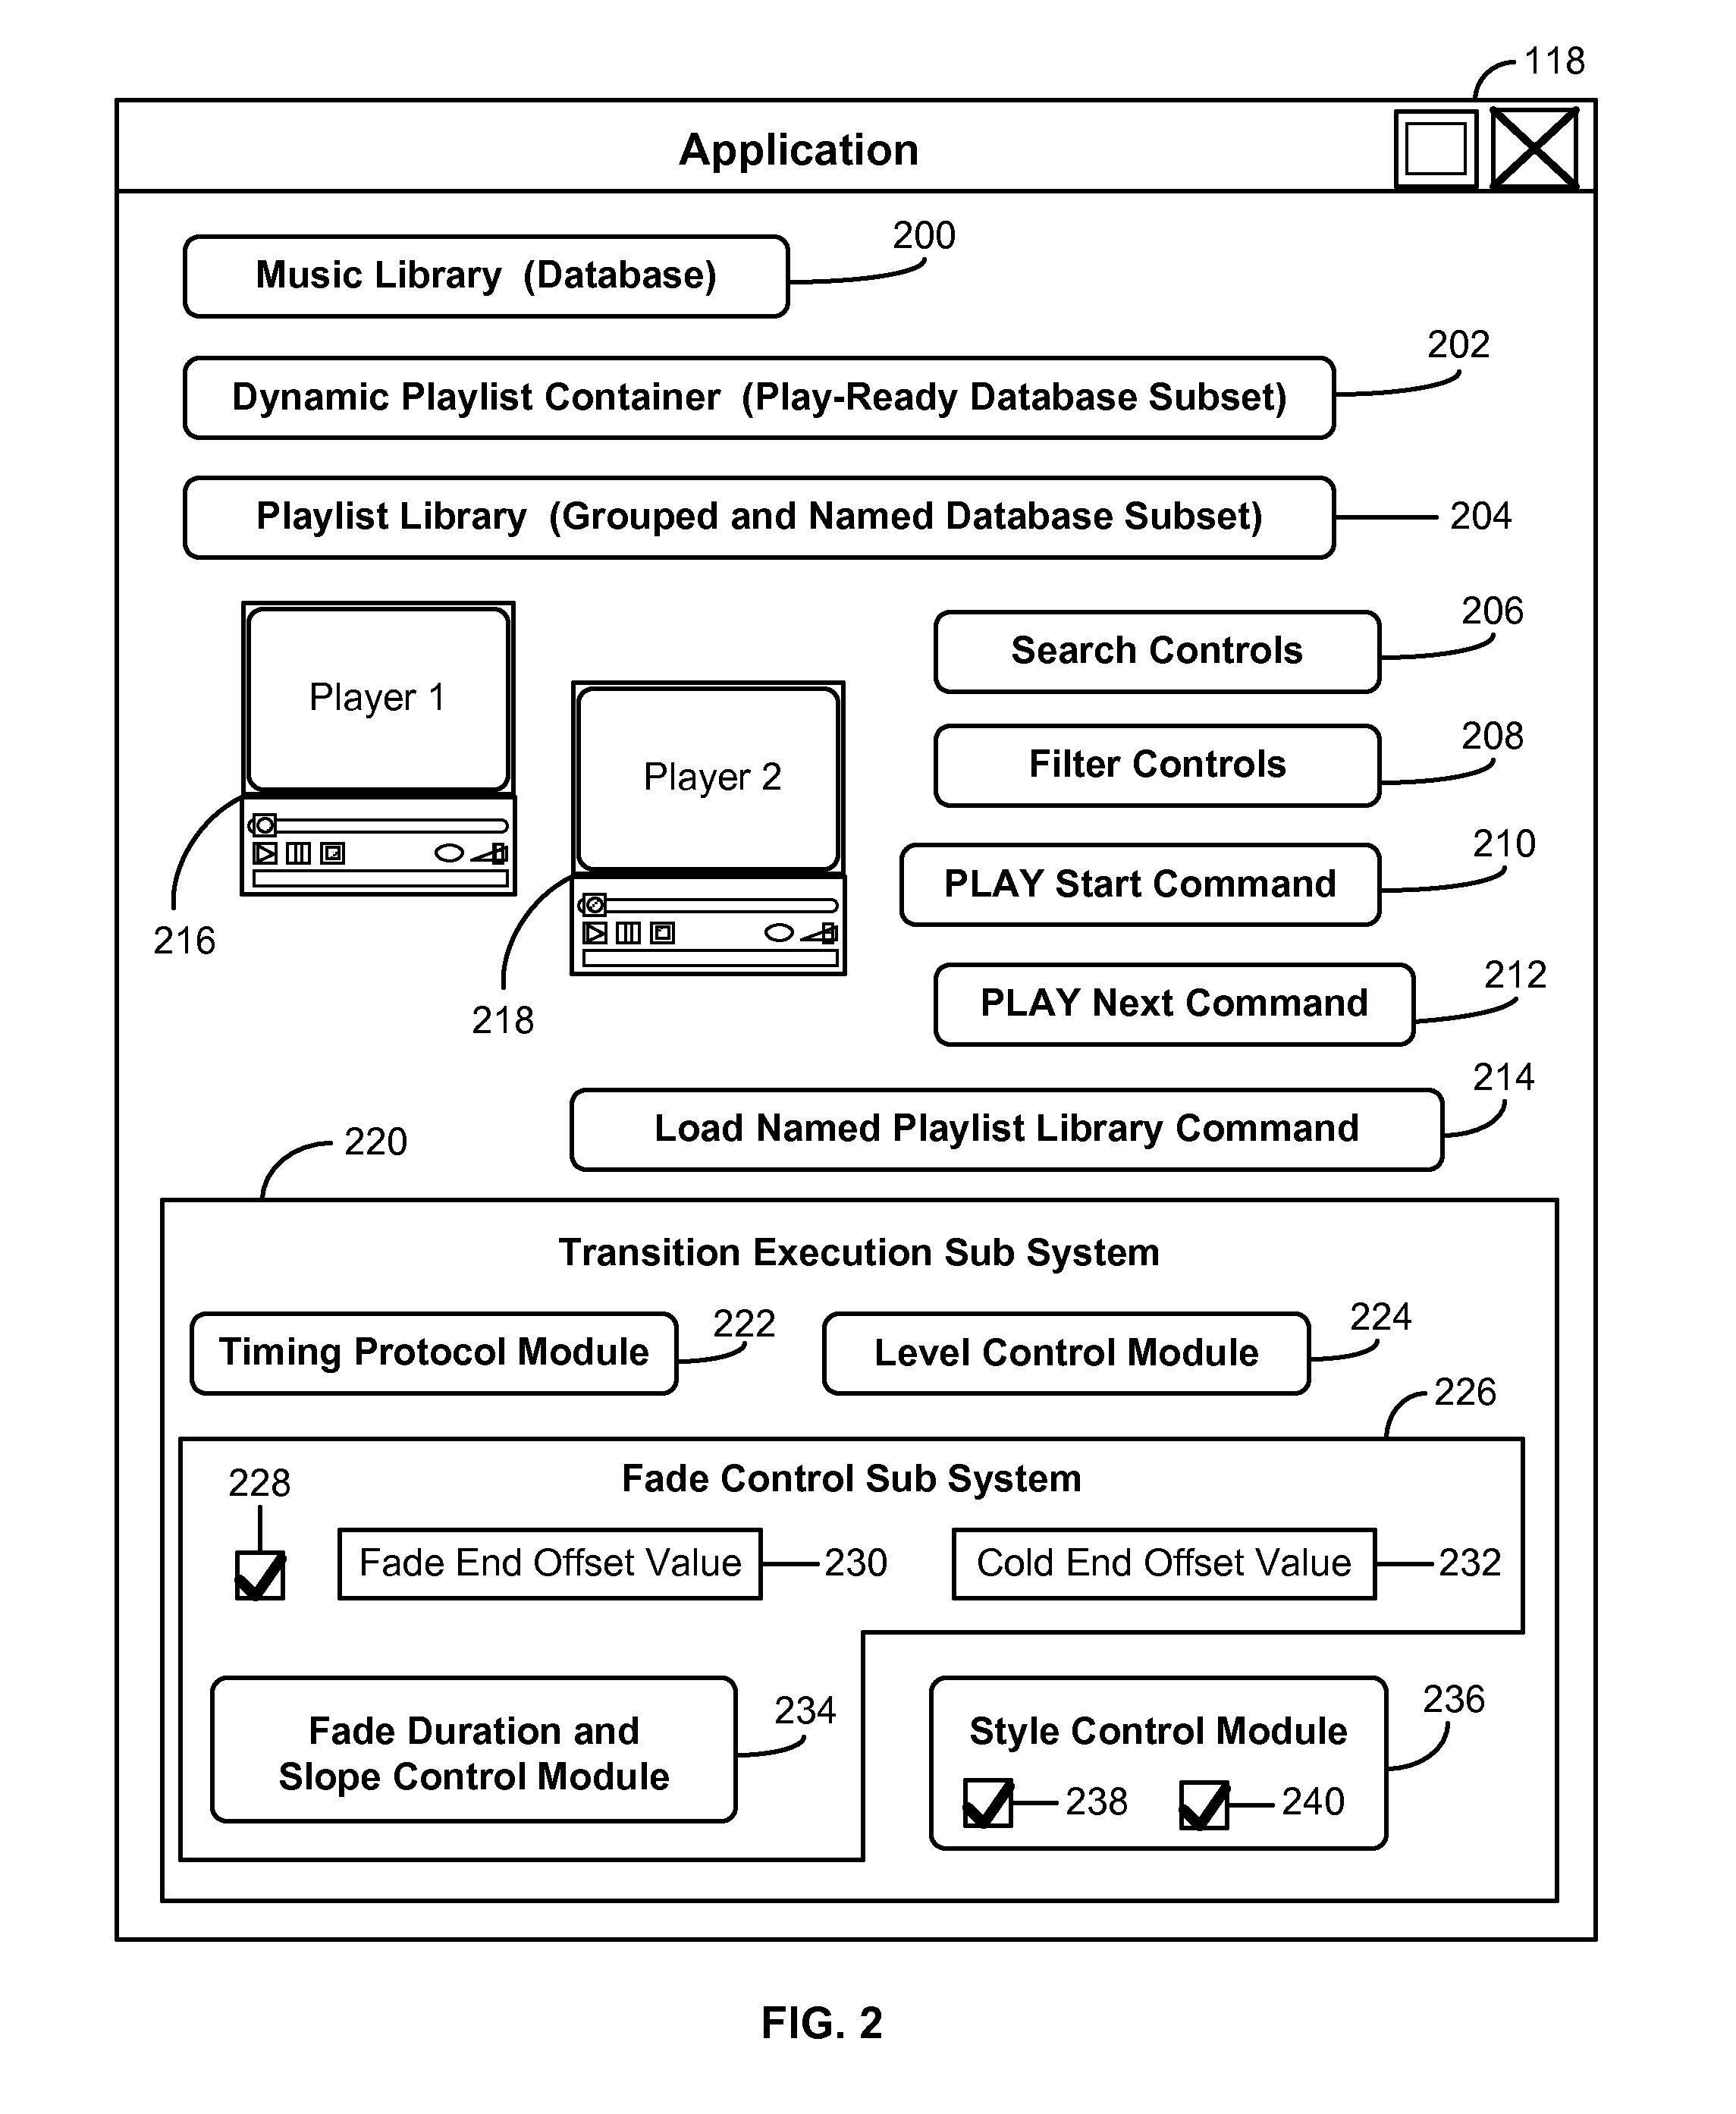 Automatic calculation of digital media content durations optimized for overlapping or adjoined transitions